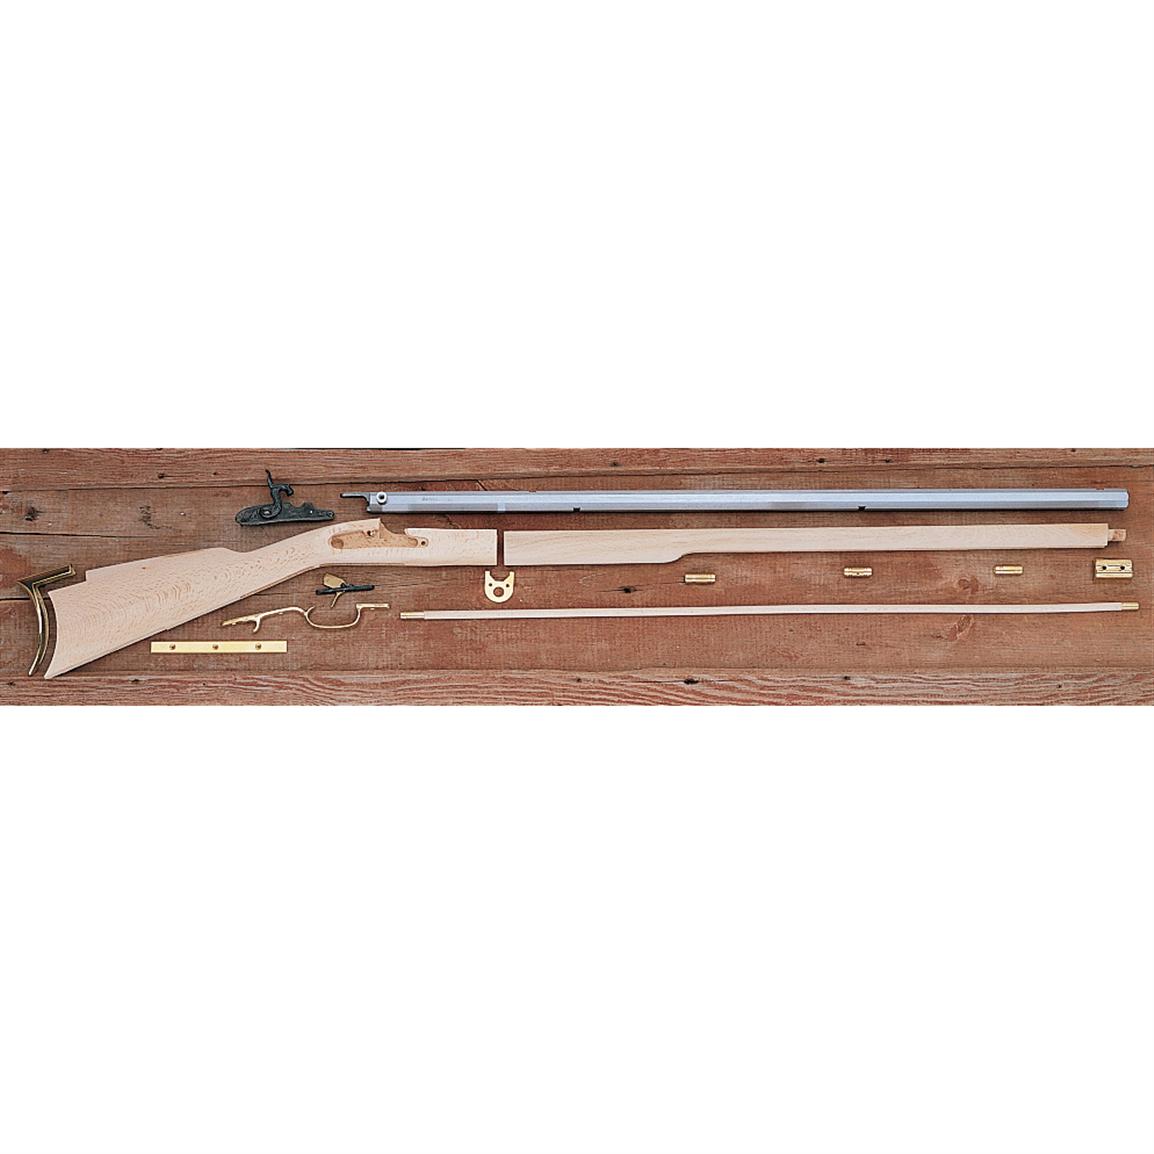 Traditions Build It Yourself .50 Caliber Kentucky Rifle Kit